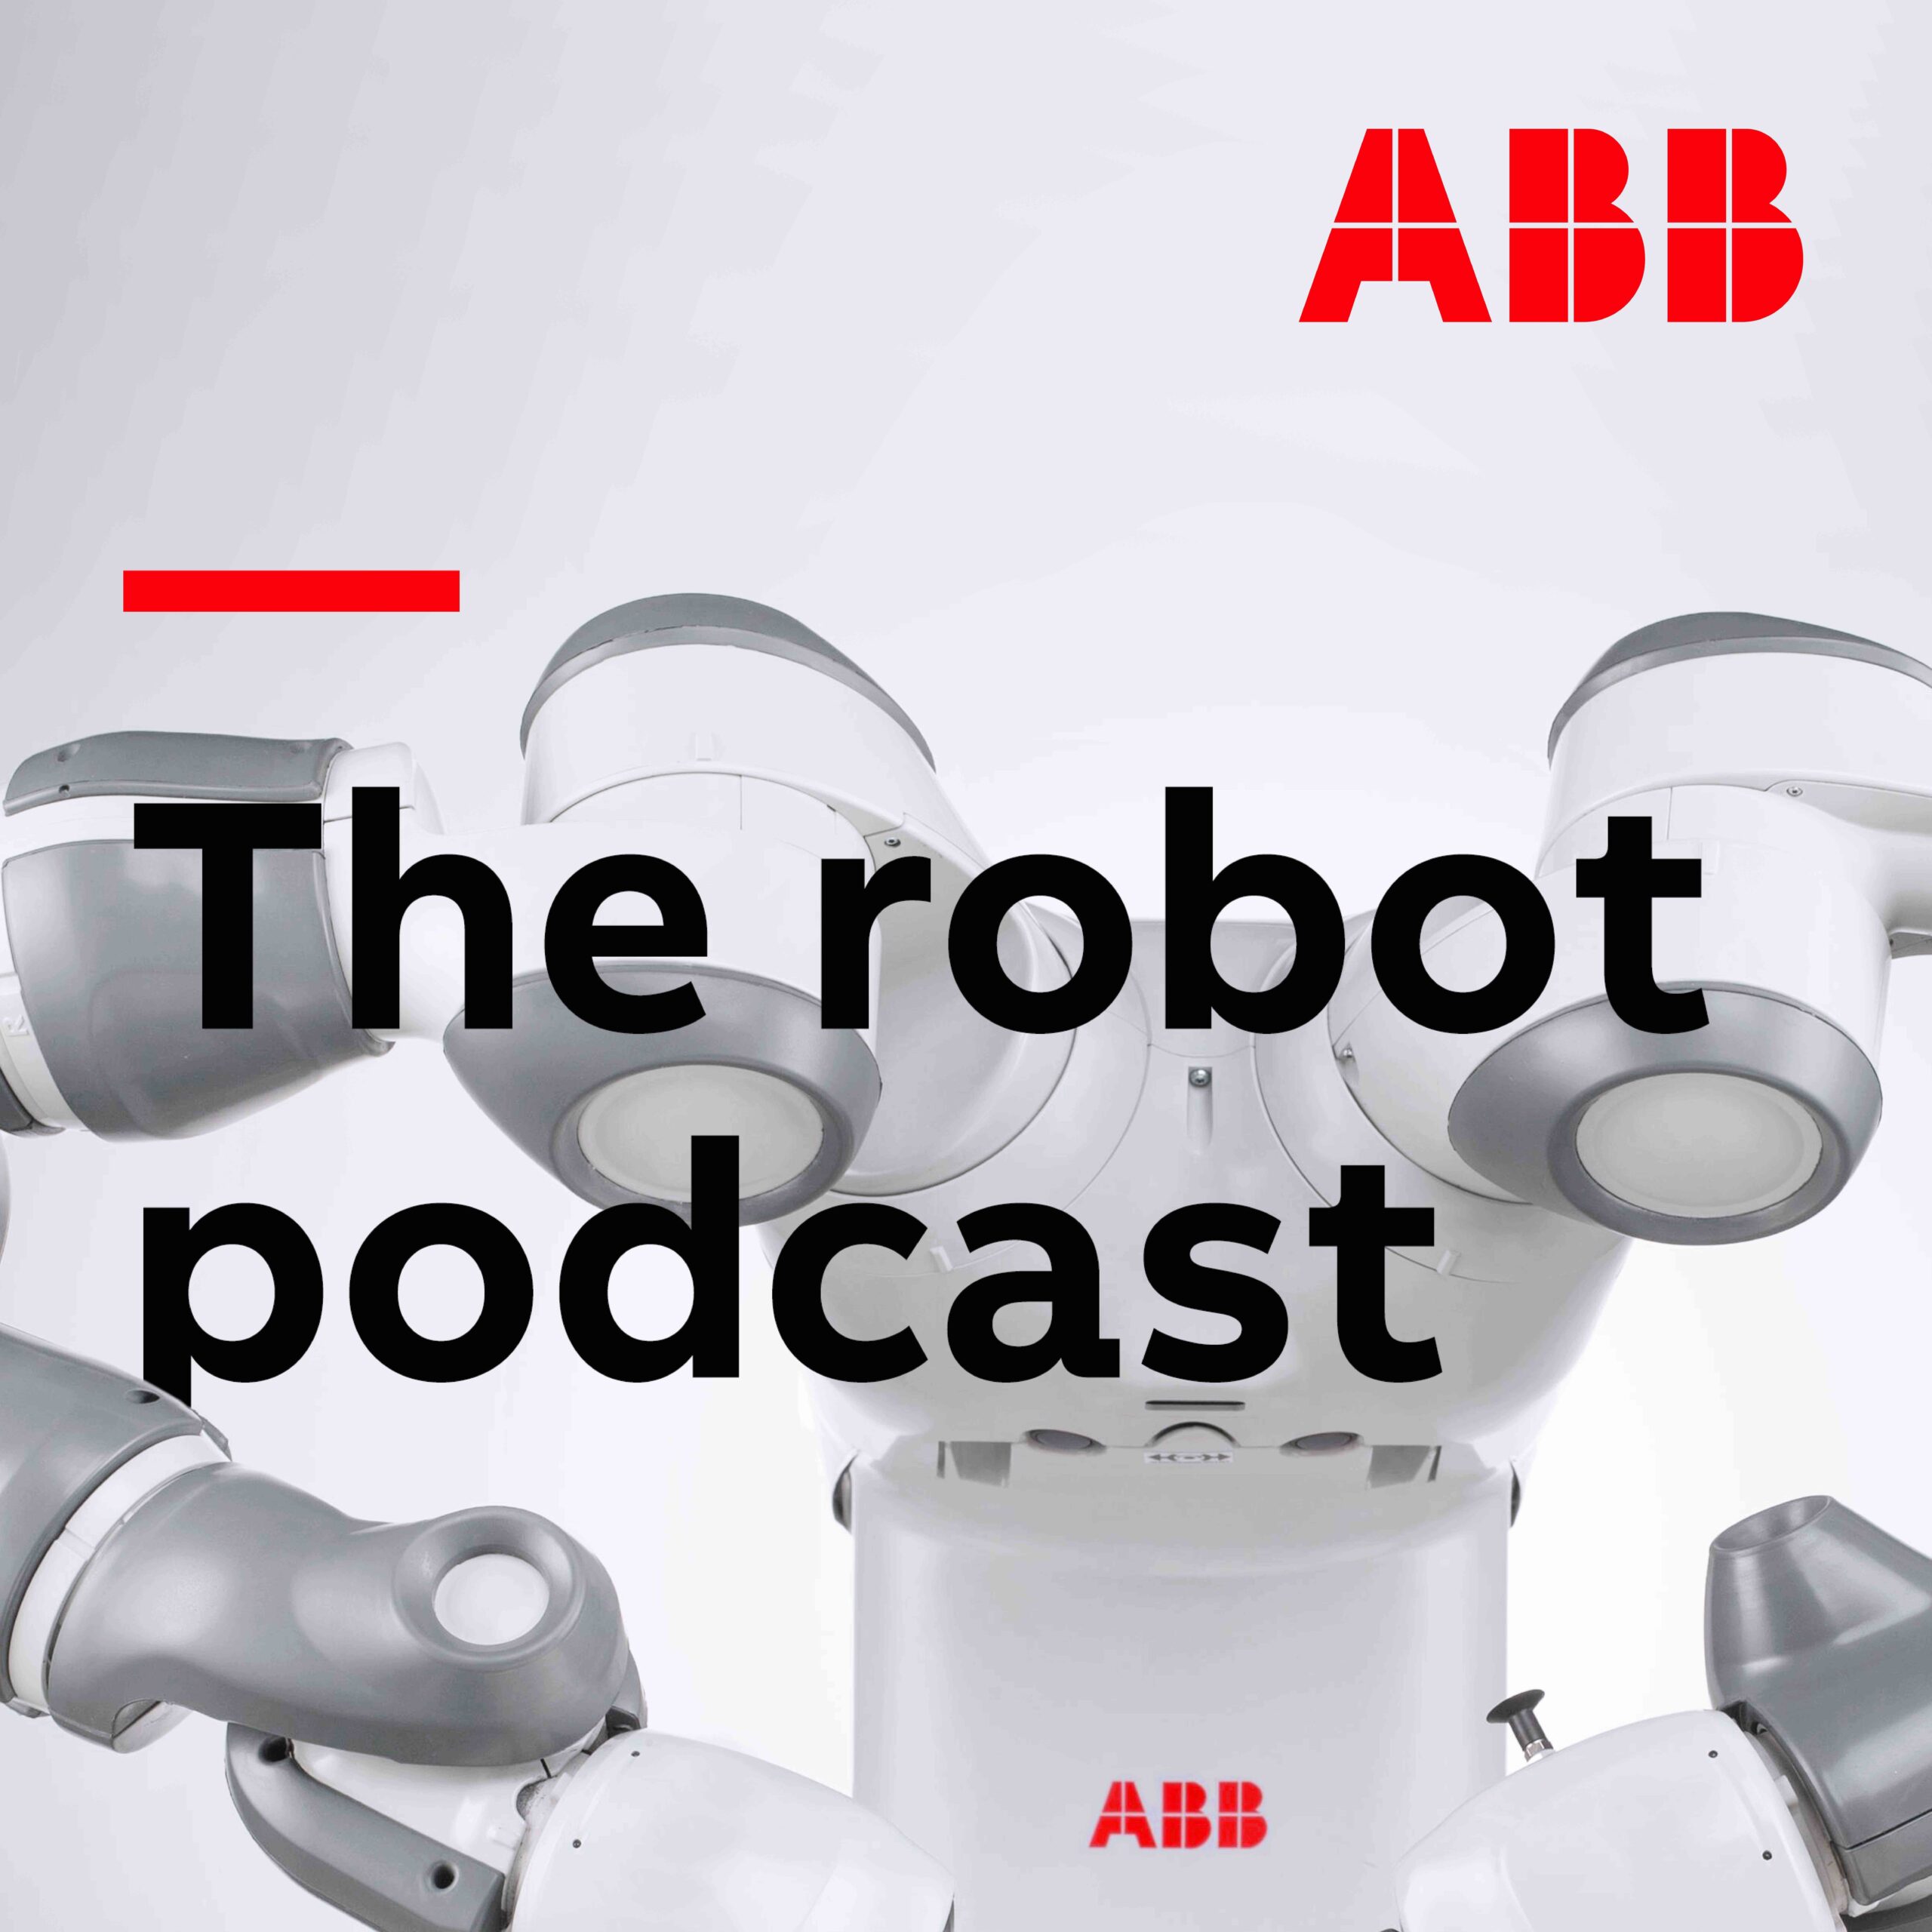 ABB’s Robot Podcast is back for Season Three